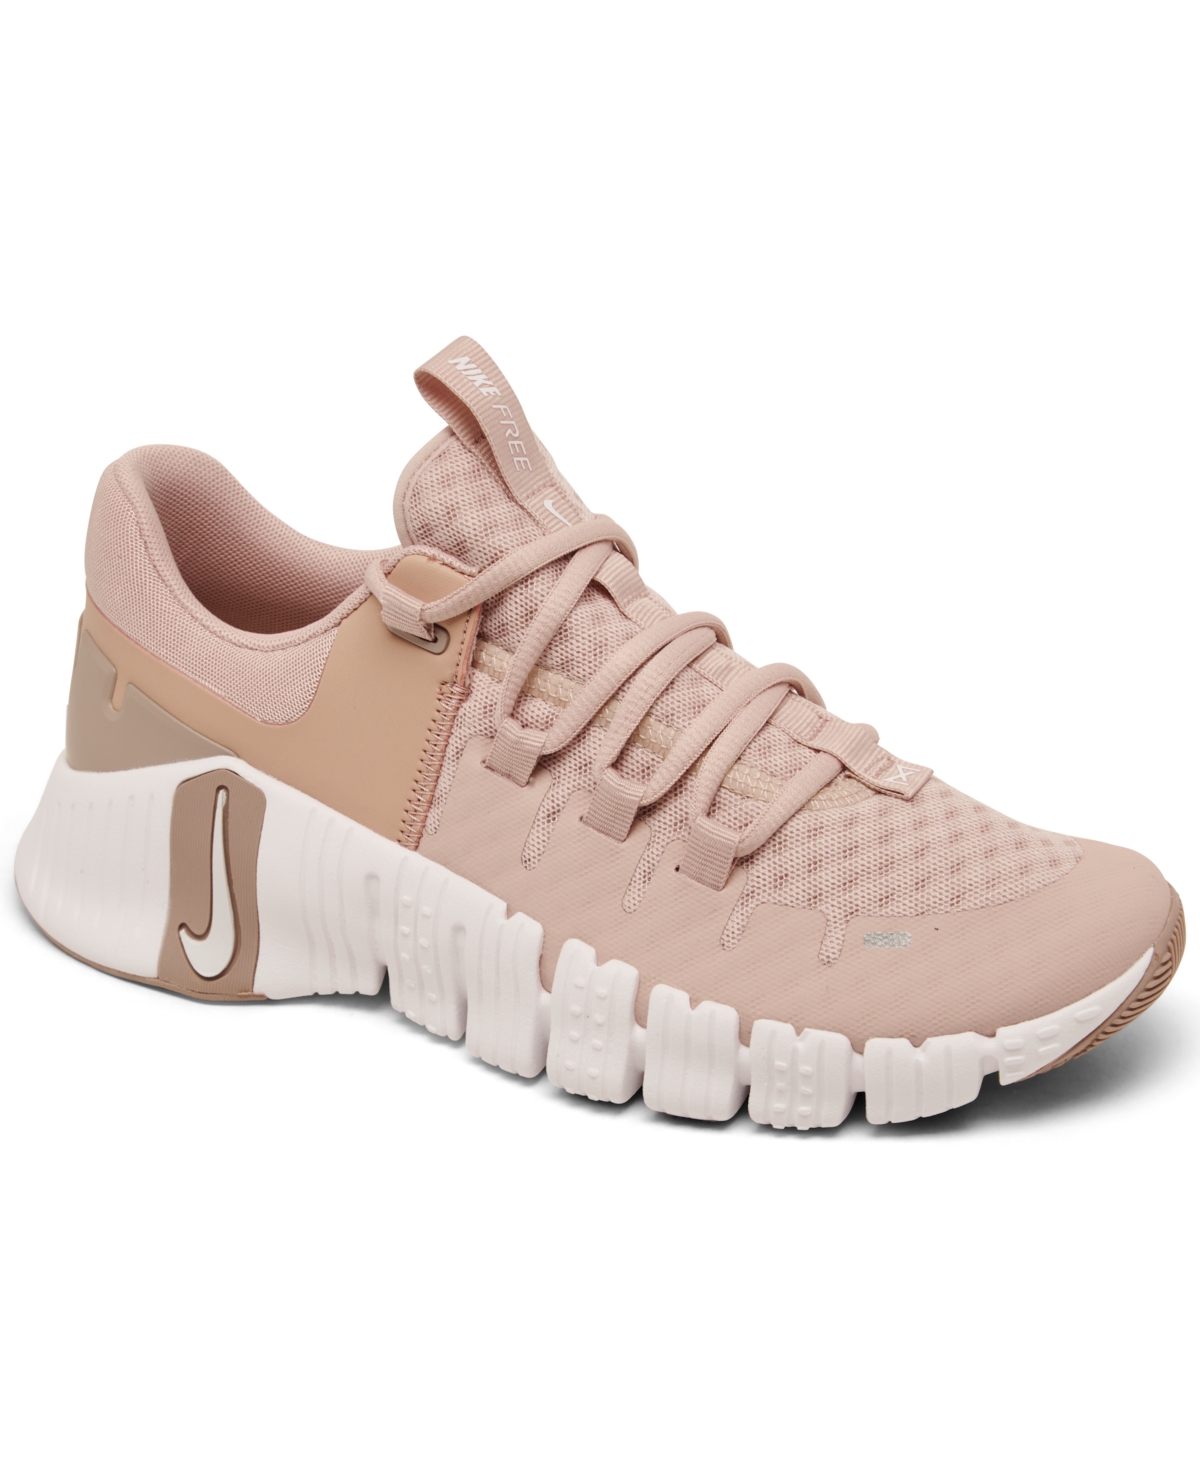 Nike Women's Free Metcon 5 Training Sneakers From Finish Line In Pink Oxford/white/diffused Taupe/gum Light Brown